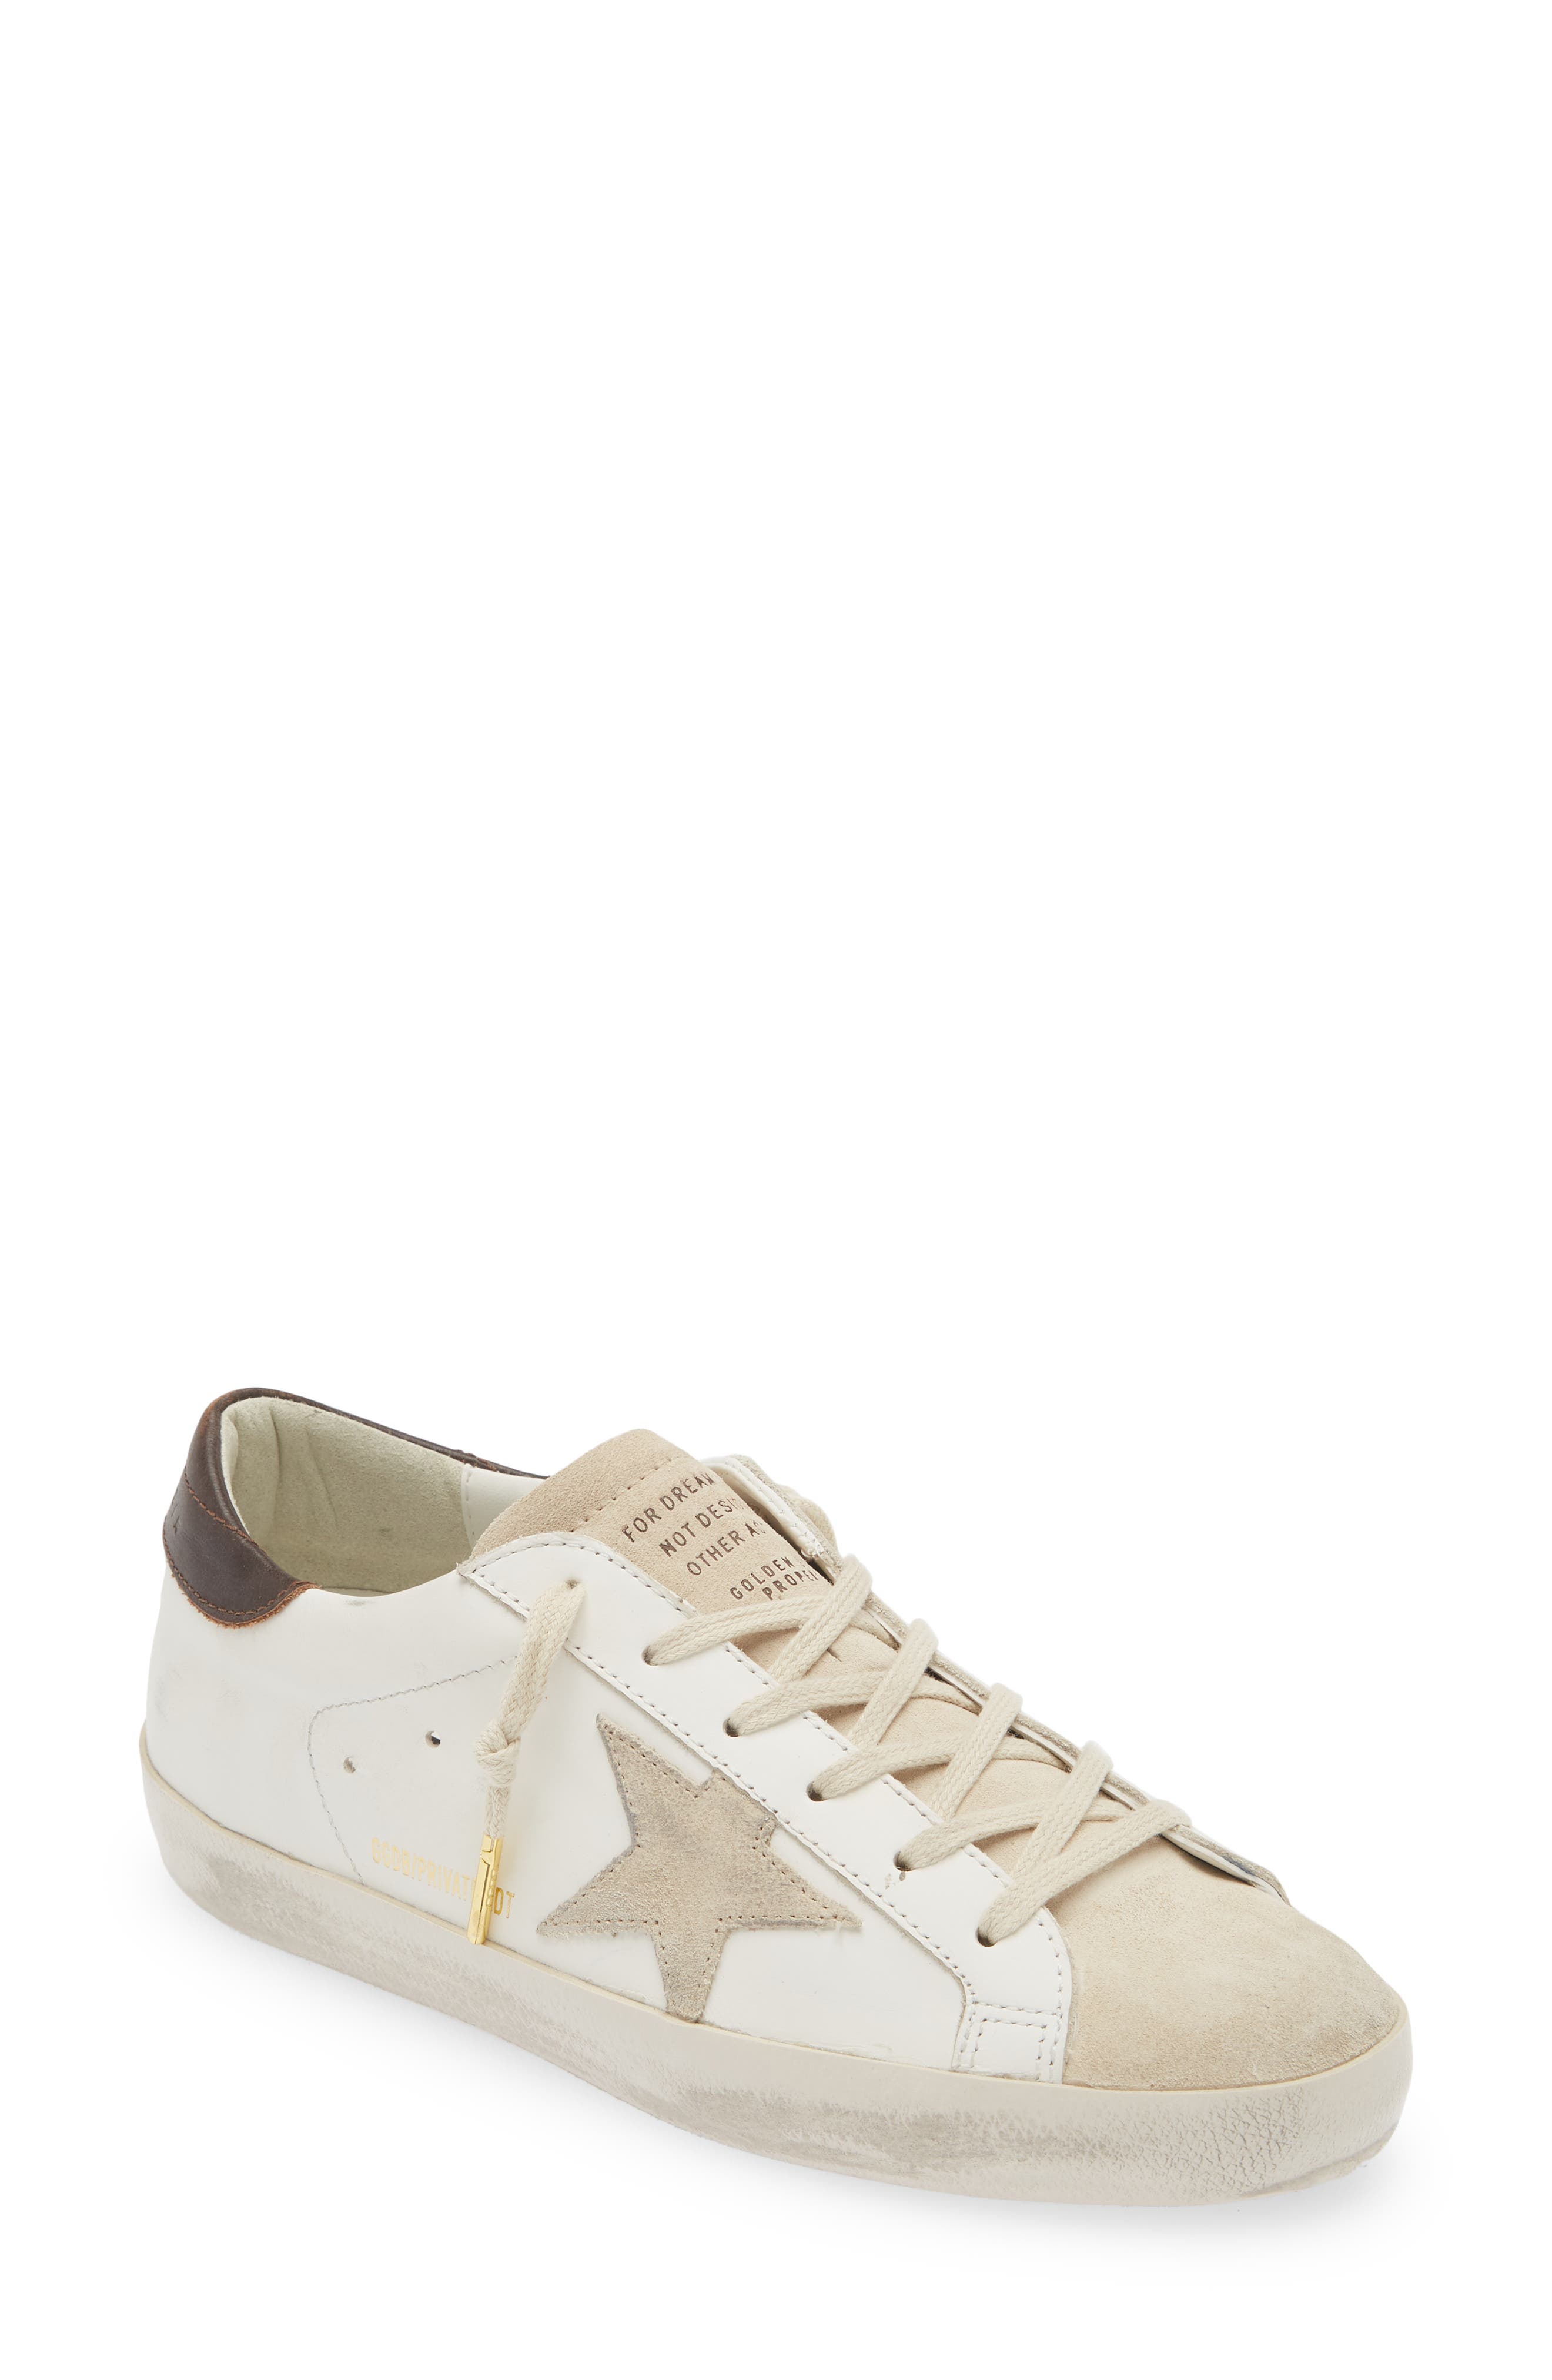 Women's Golden Goose White Sneakers u0026 Athletic Shoes | Nordstrom